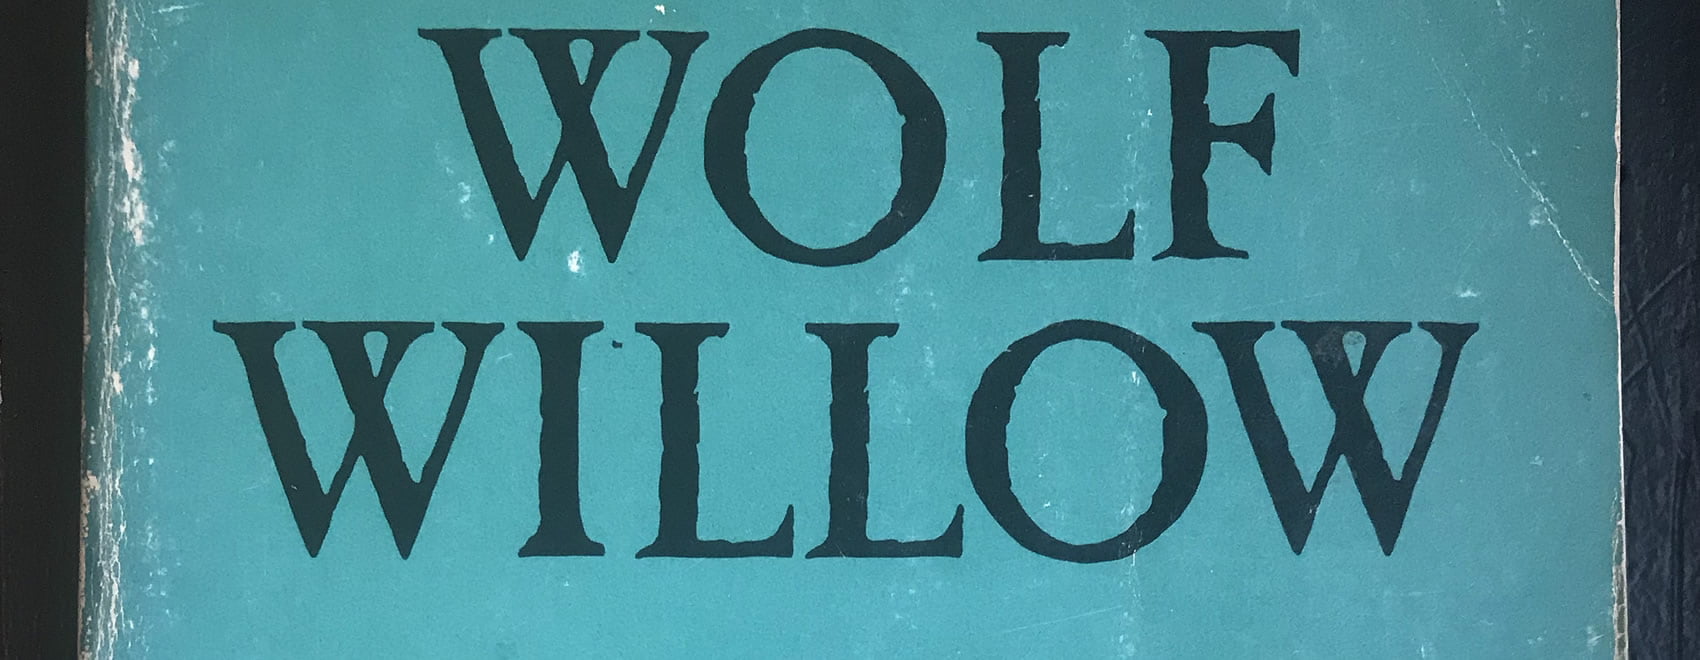 Wolf Willow by Wallace Stegner